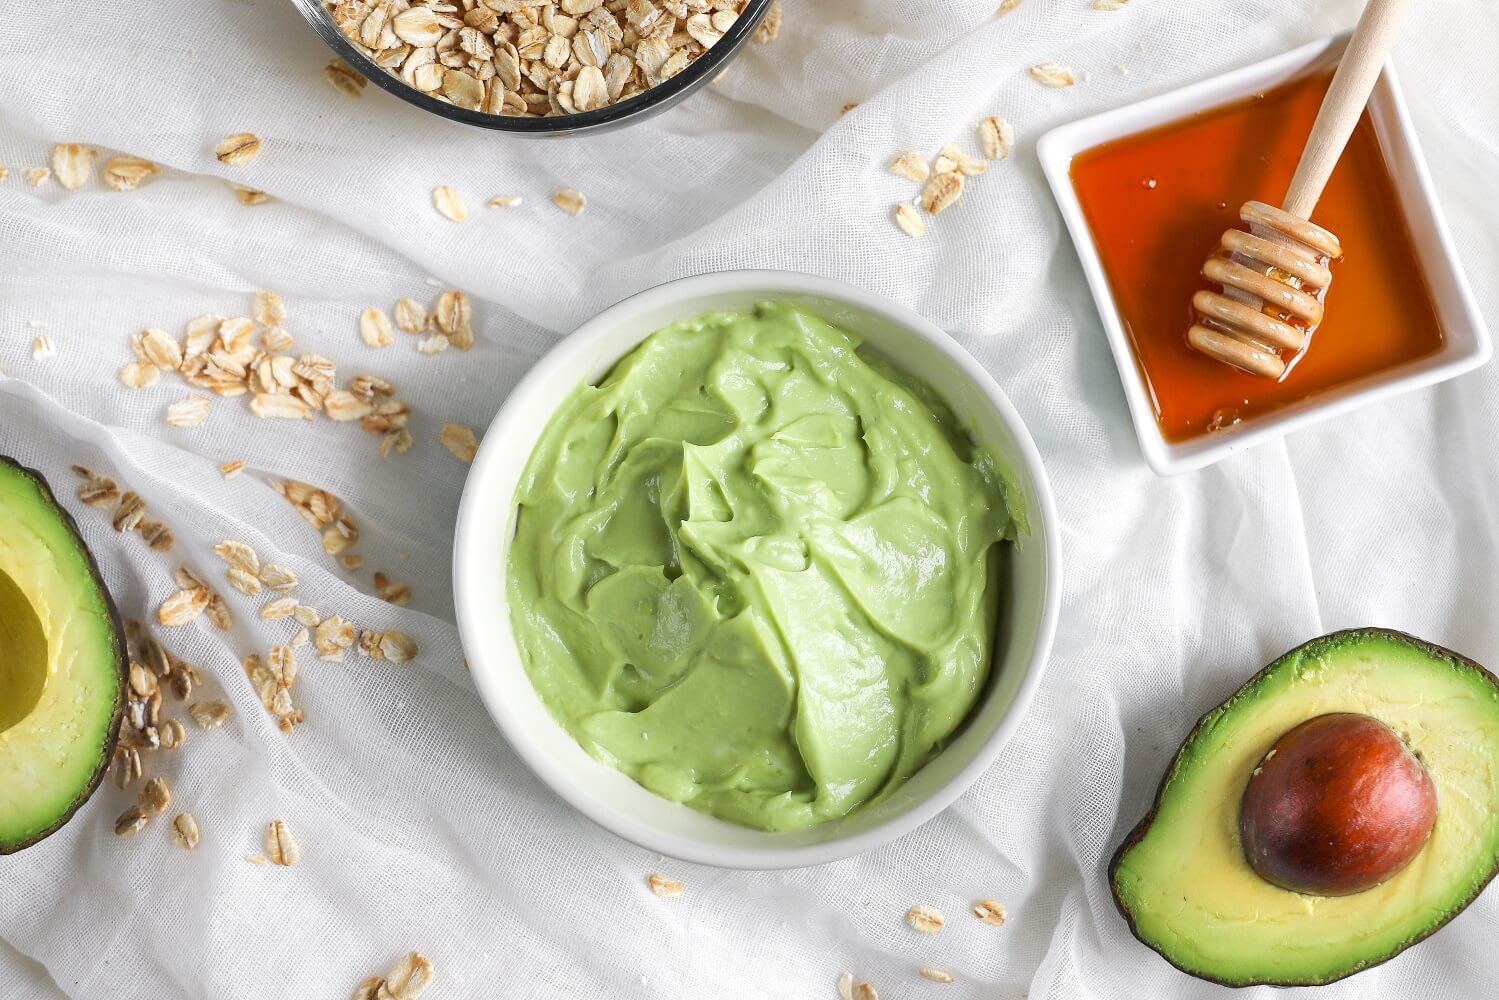 Avocado Face Mask - Simple and Rejuvenating! - The Moms